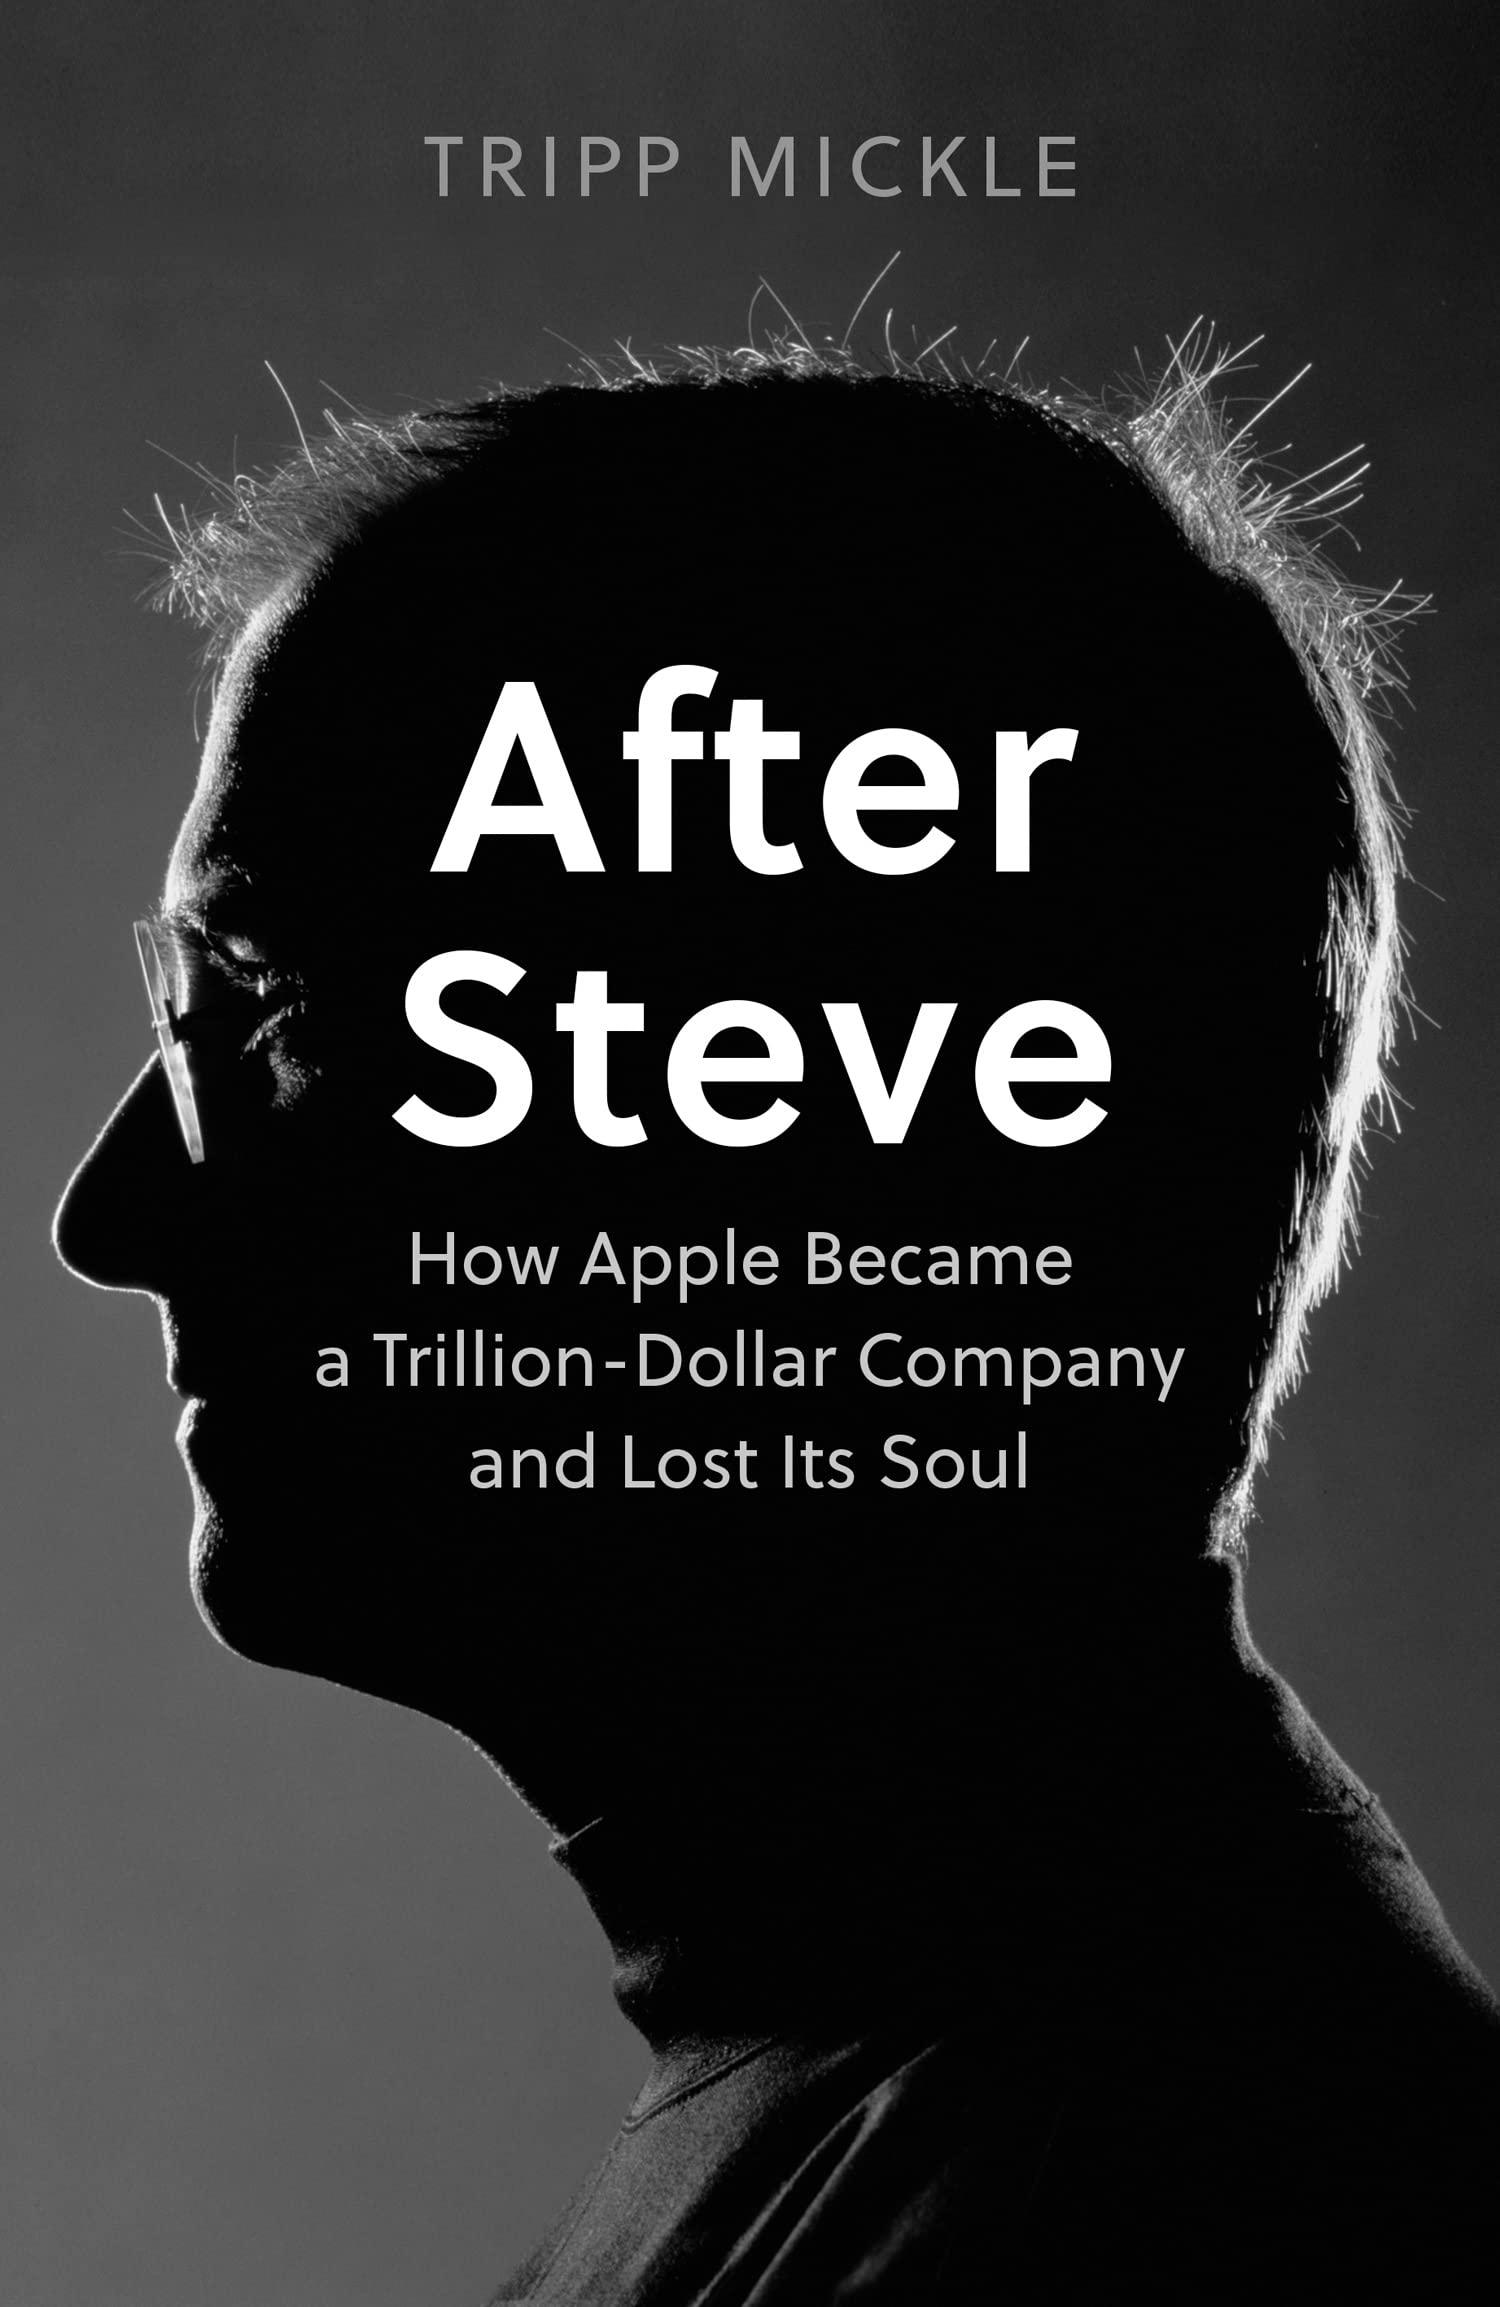 After Steve by Tripp Mickle